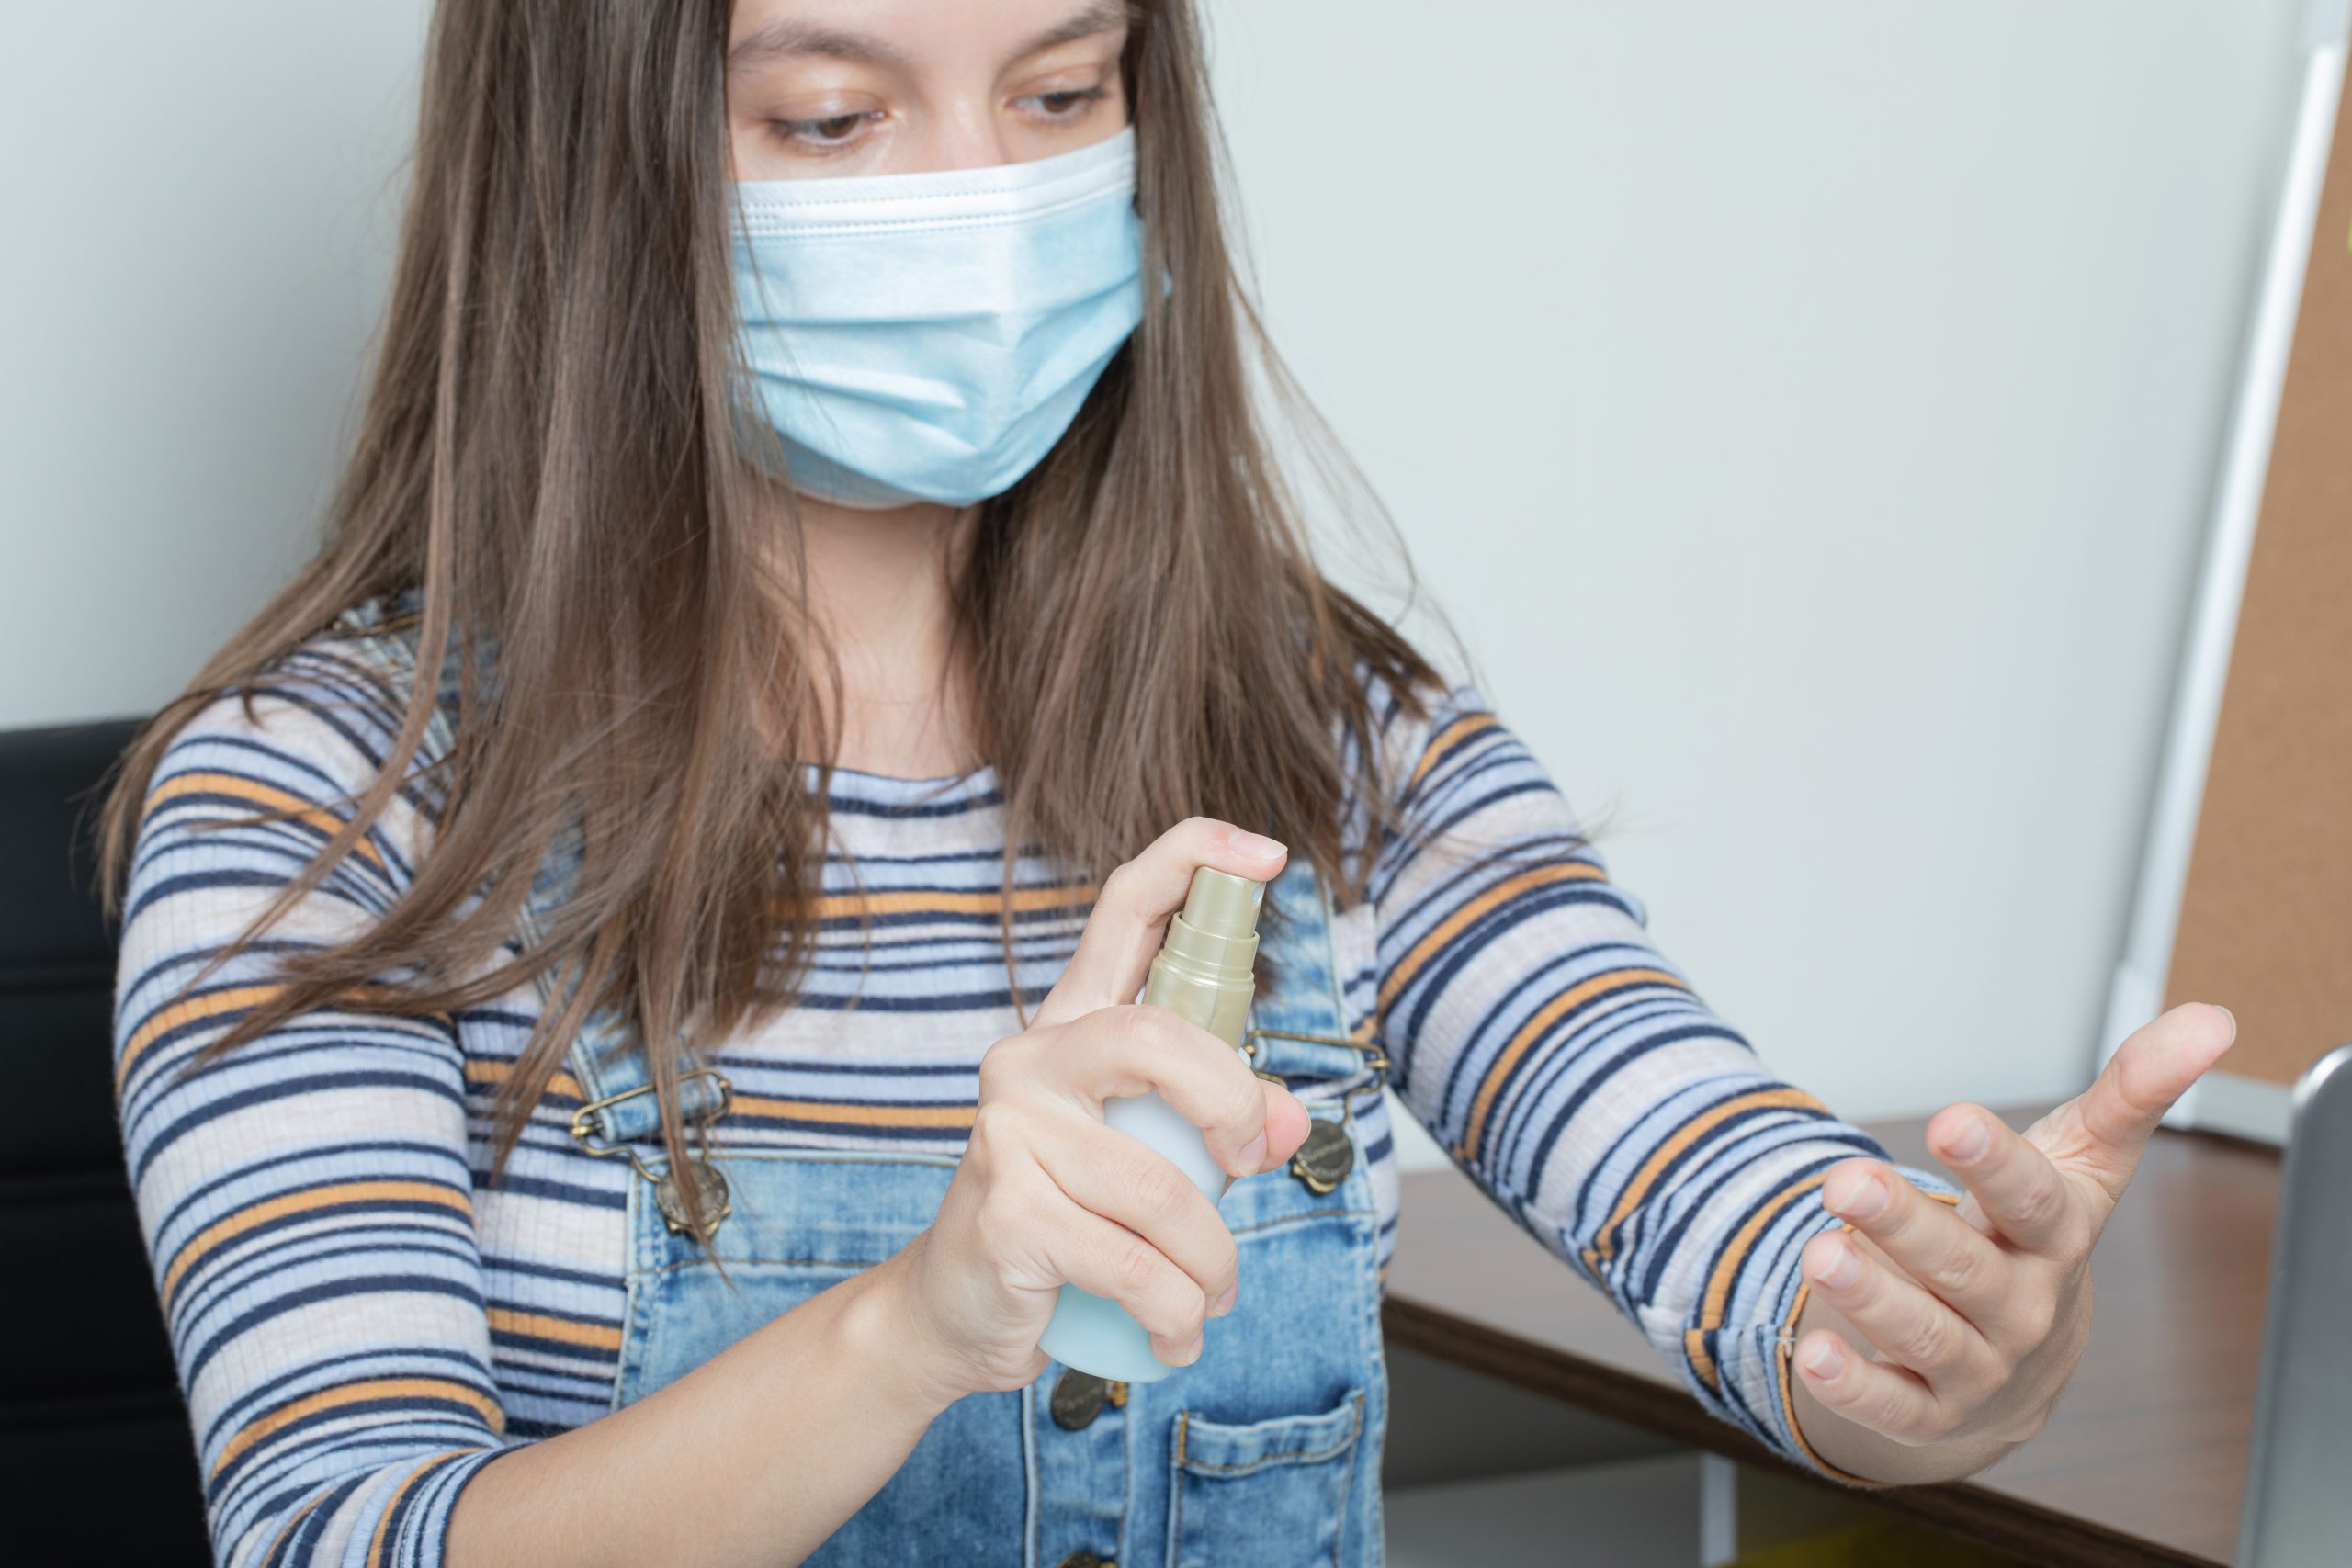 Girl with mask on her face, sanitizing her hand